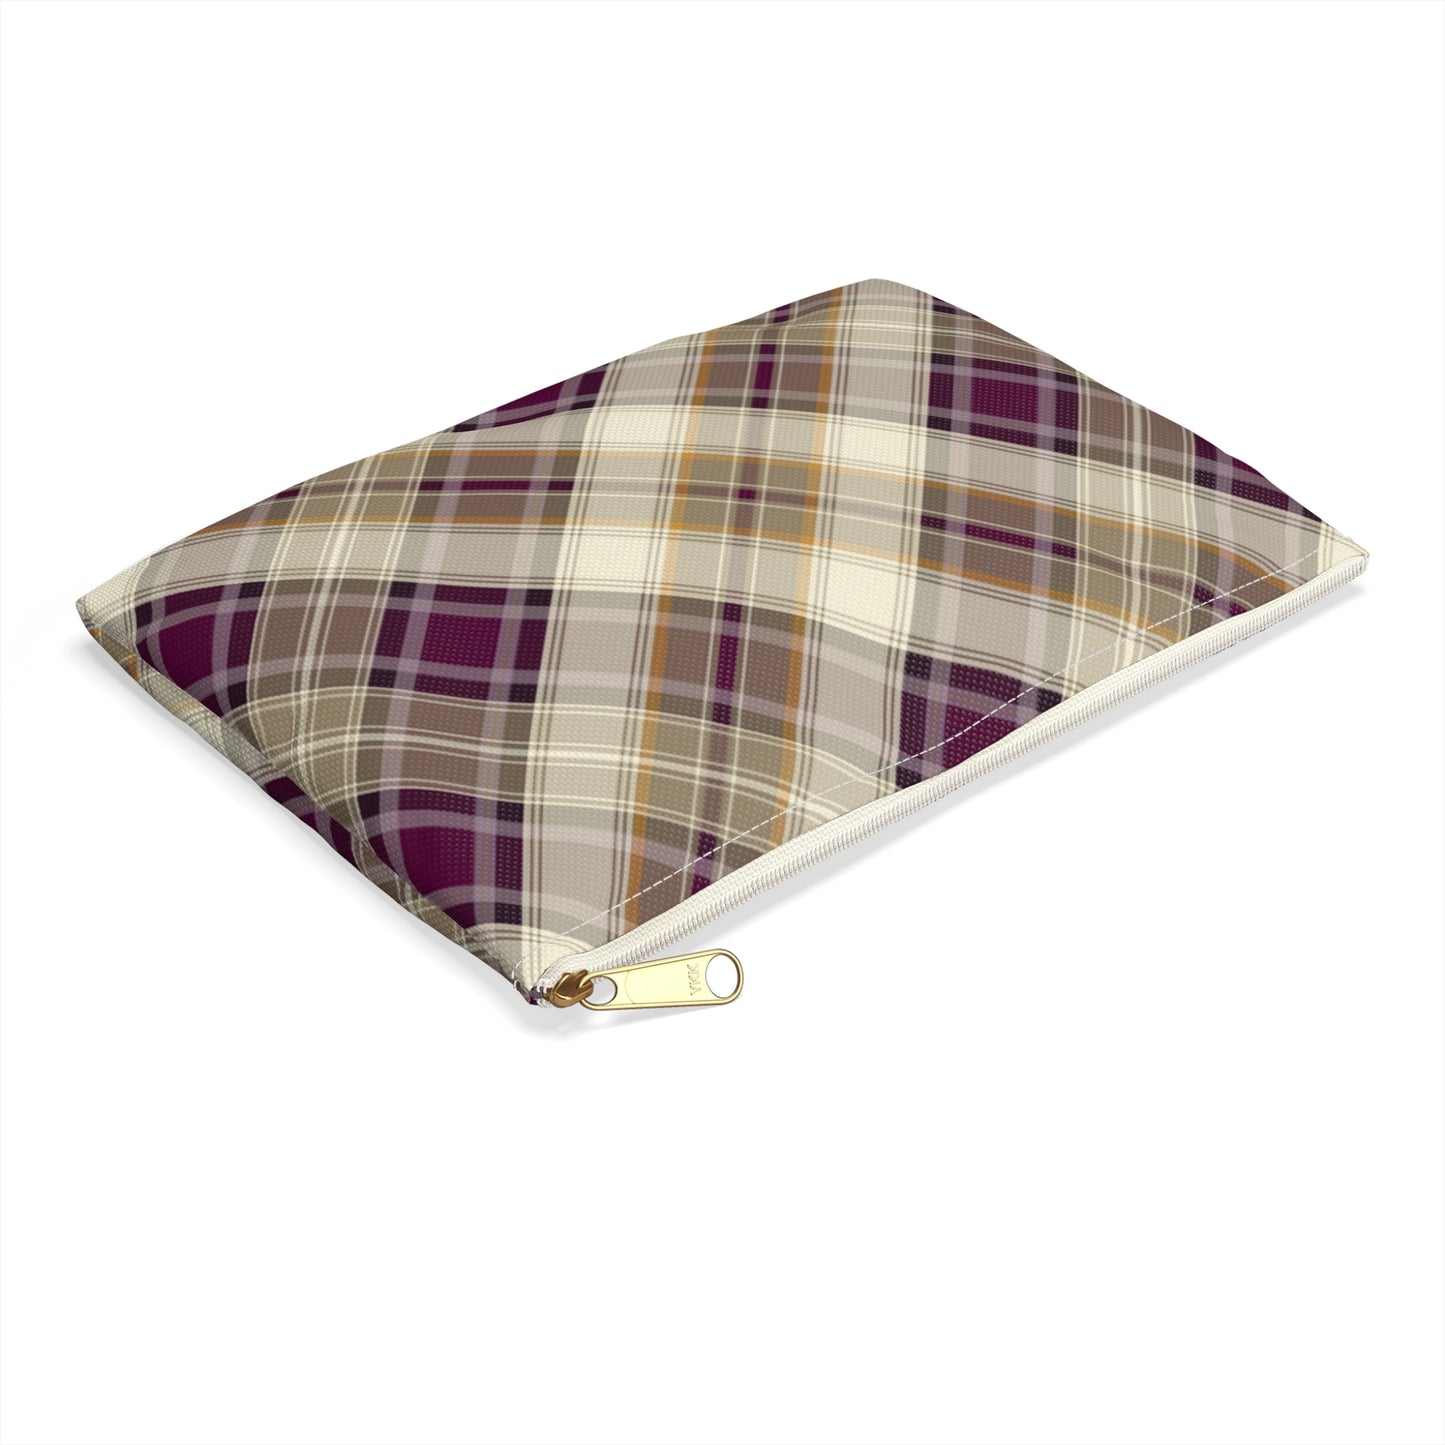 Scottish Plaid Pouch - The Global Wanderer